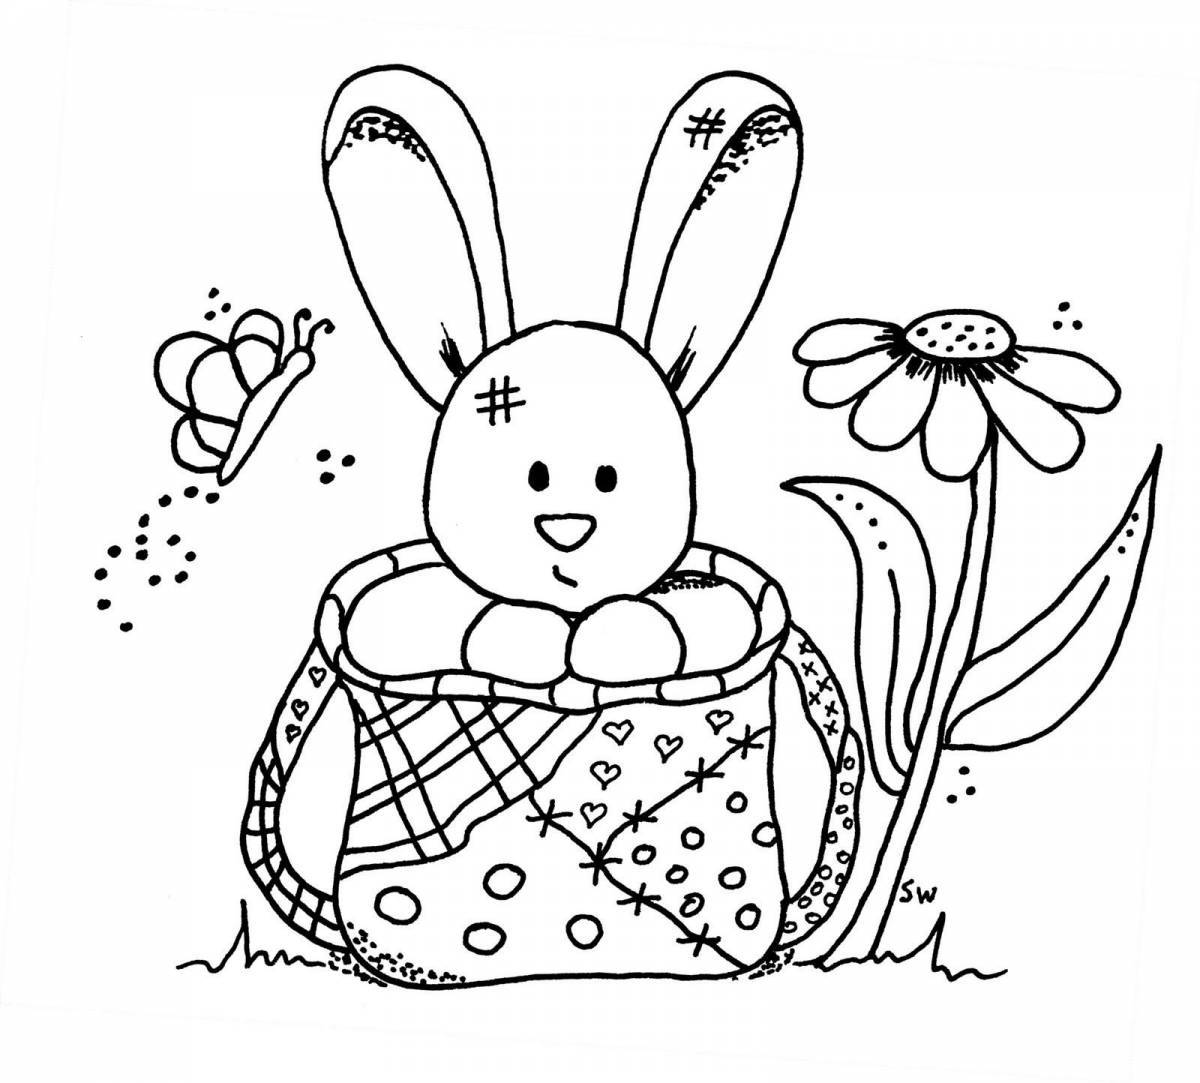 Color explosion new year bunny coloring page